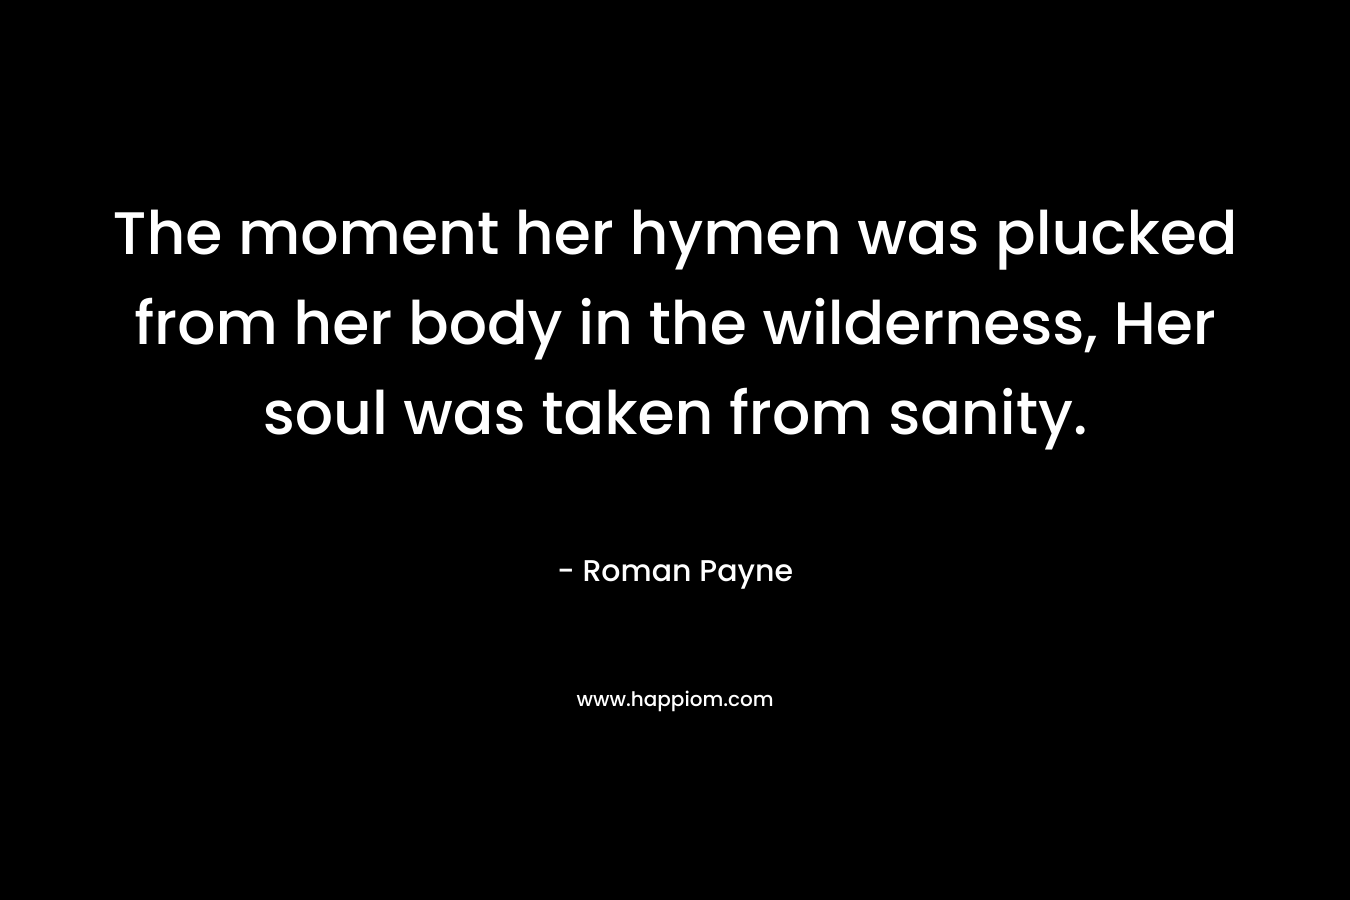 The moment her hymen was plucked from her body in the wilderness, Her soul was taken from sanity.